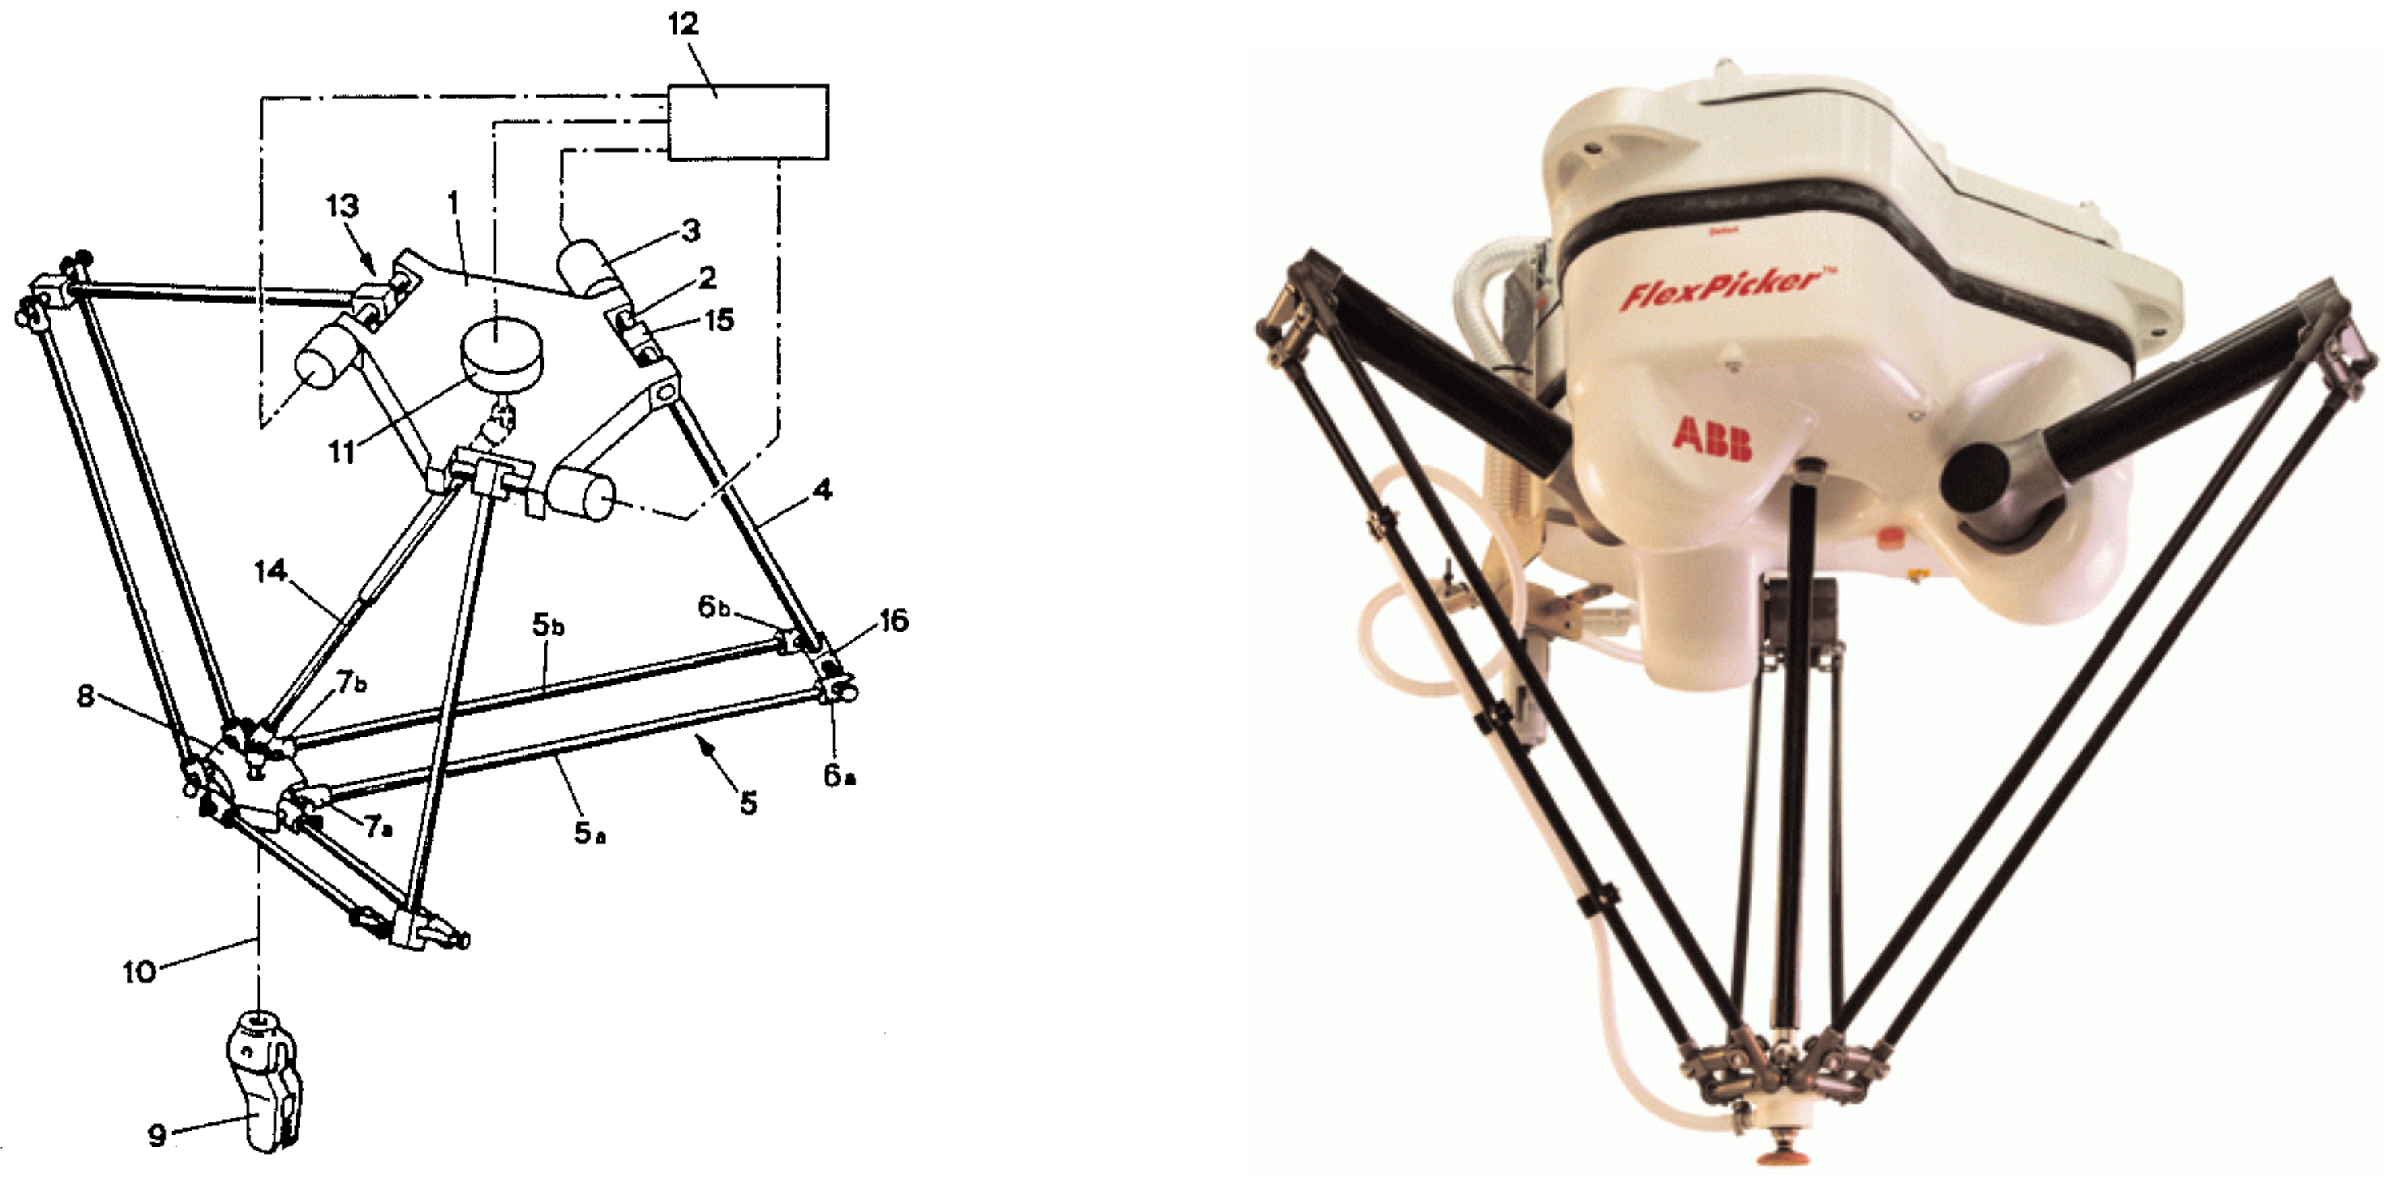 Engineering Proceedings | Free Full-Text | The 3D-Printed Low-Cost Delta  Robot &Oacute;scar: Technology Overview and Benchmarking